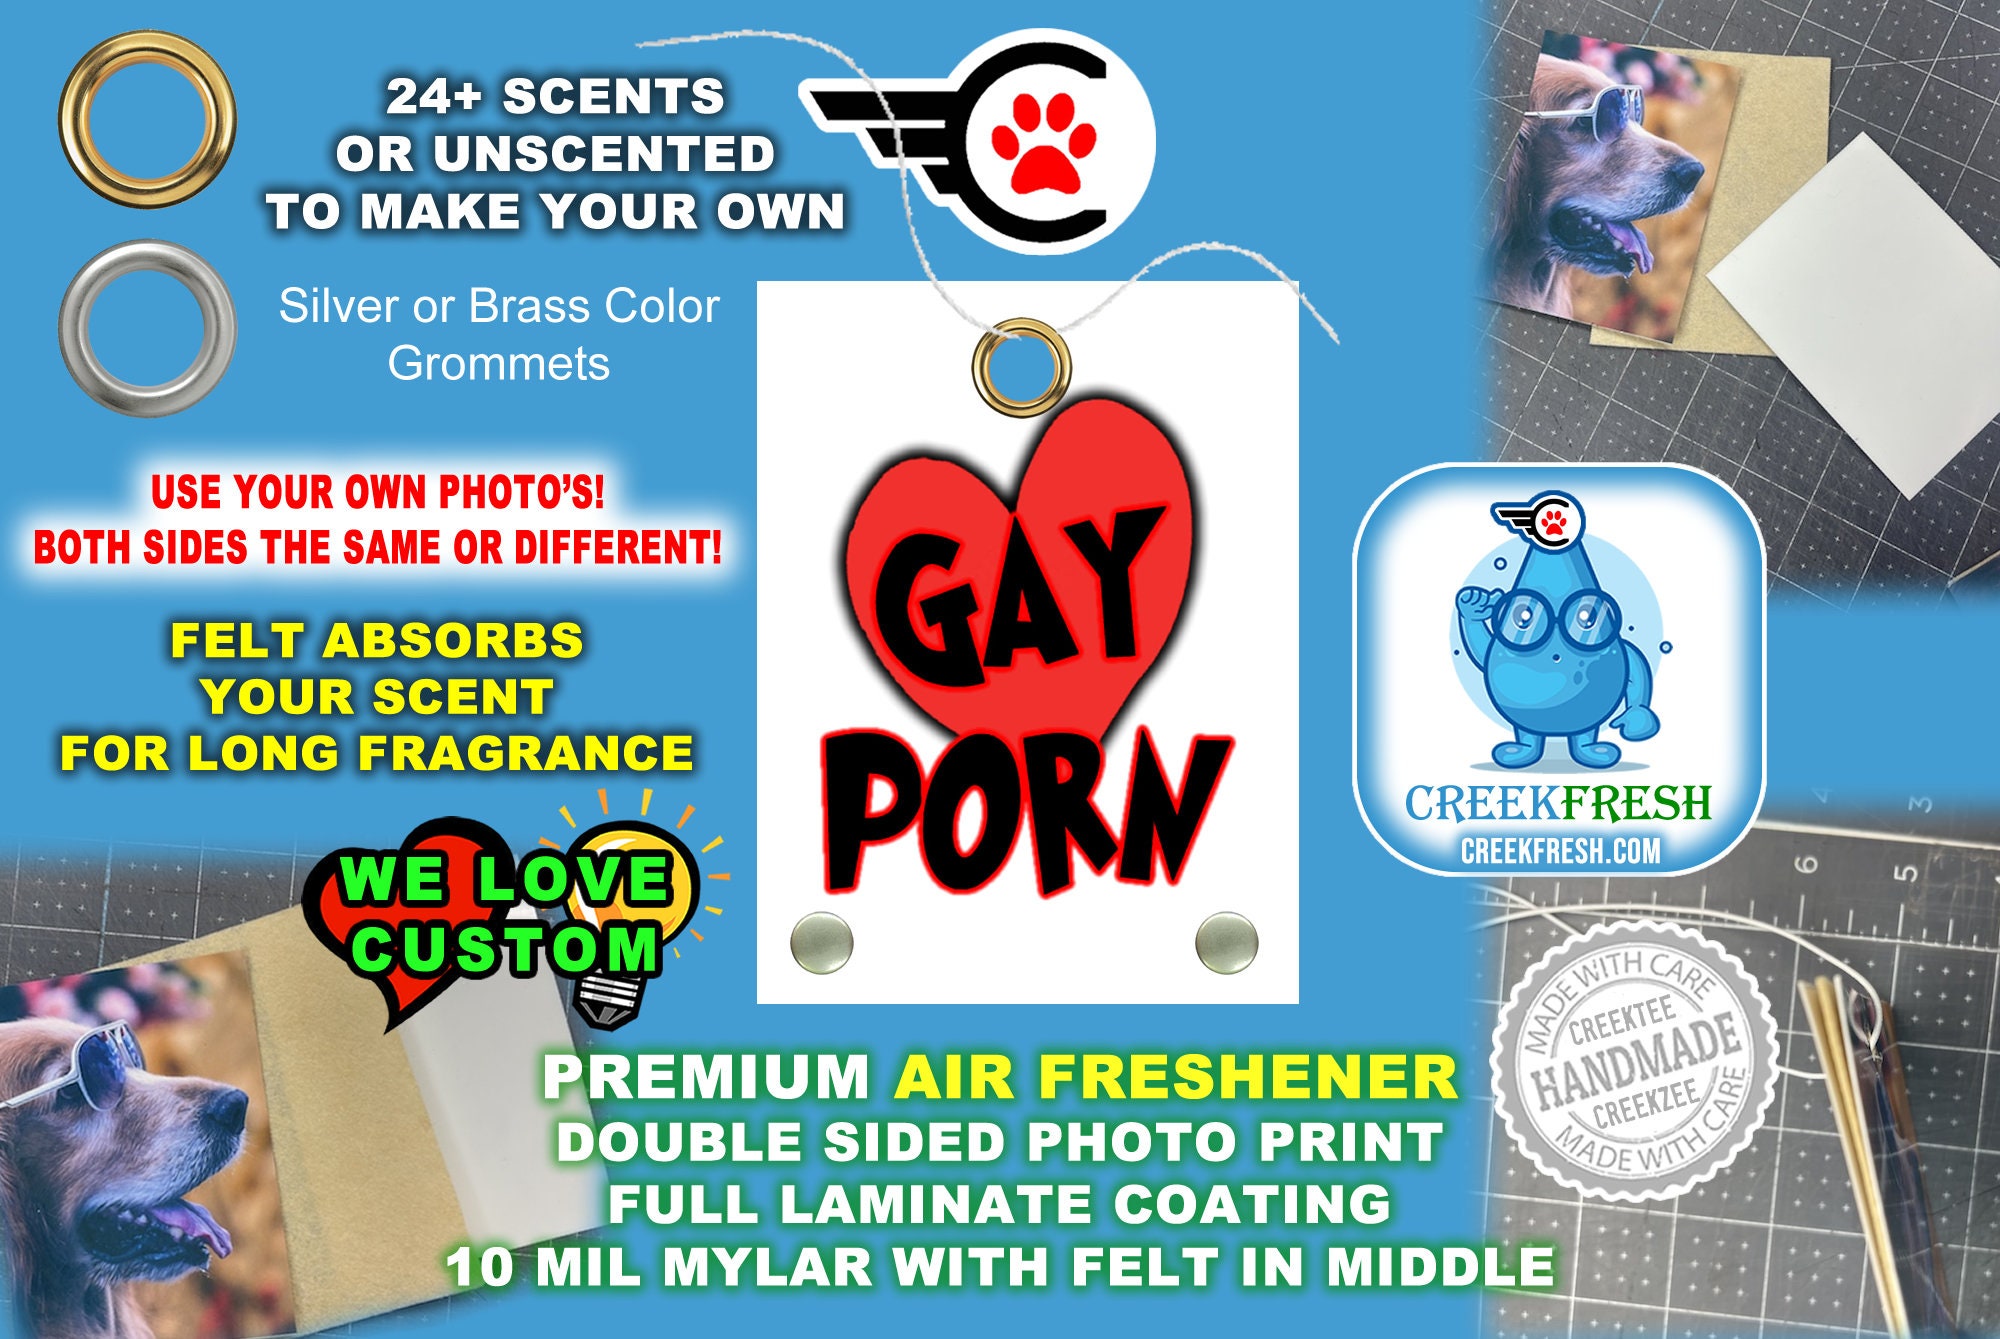 Love Gay Porn Premium Air Freshener Color Photo Print with Felt middle for fragrance absorption -Scented or un-Scented - Double Sd.